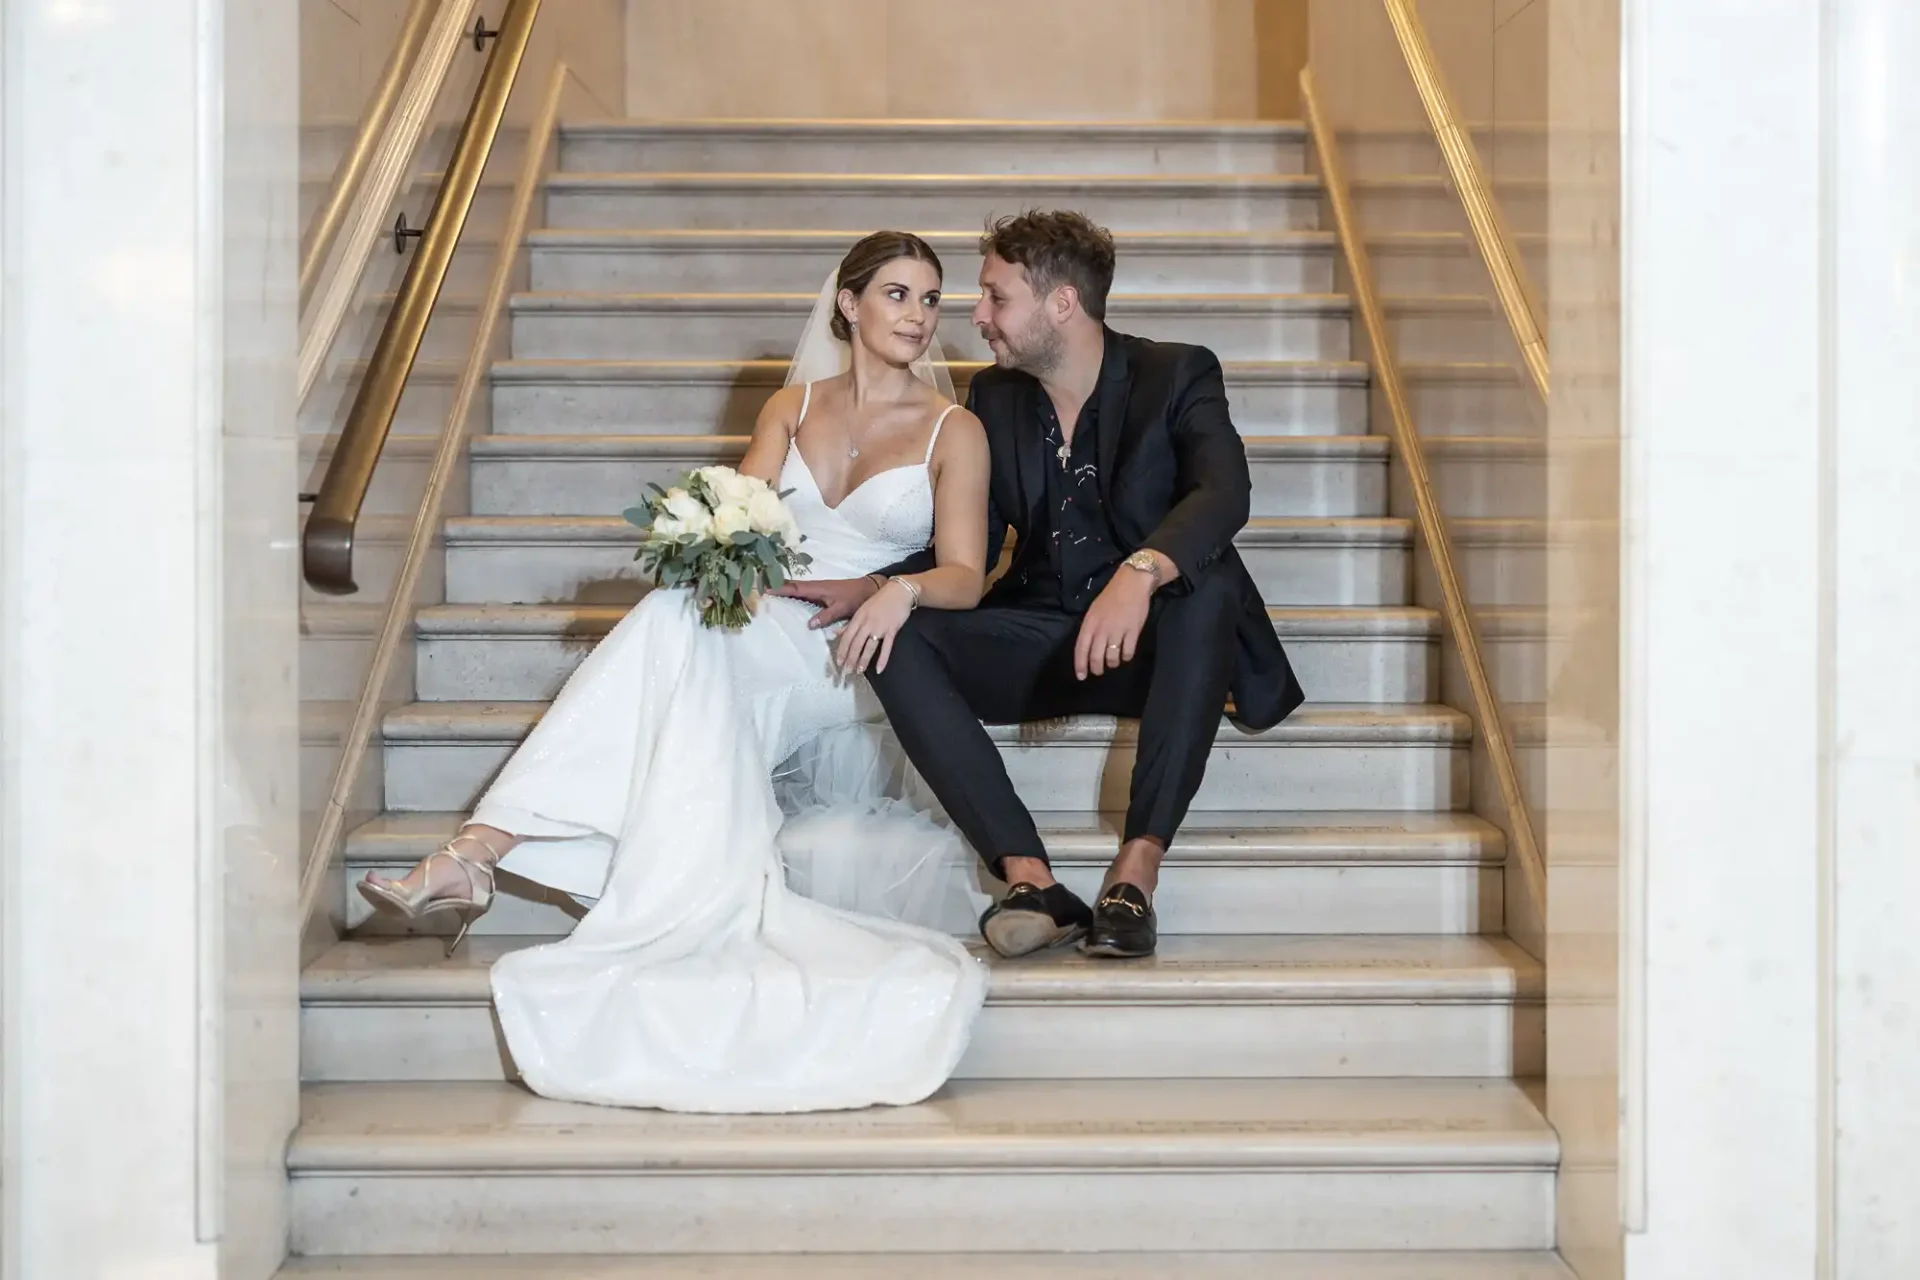 A bride in a white dress and a groom in a black suit sit closely on marble stairs, exchanging a loving gaze, with the bride holding a bouquet.